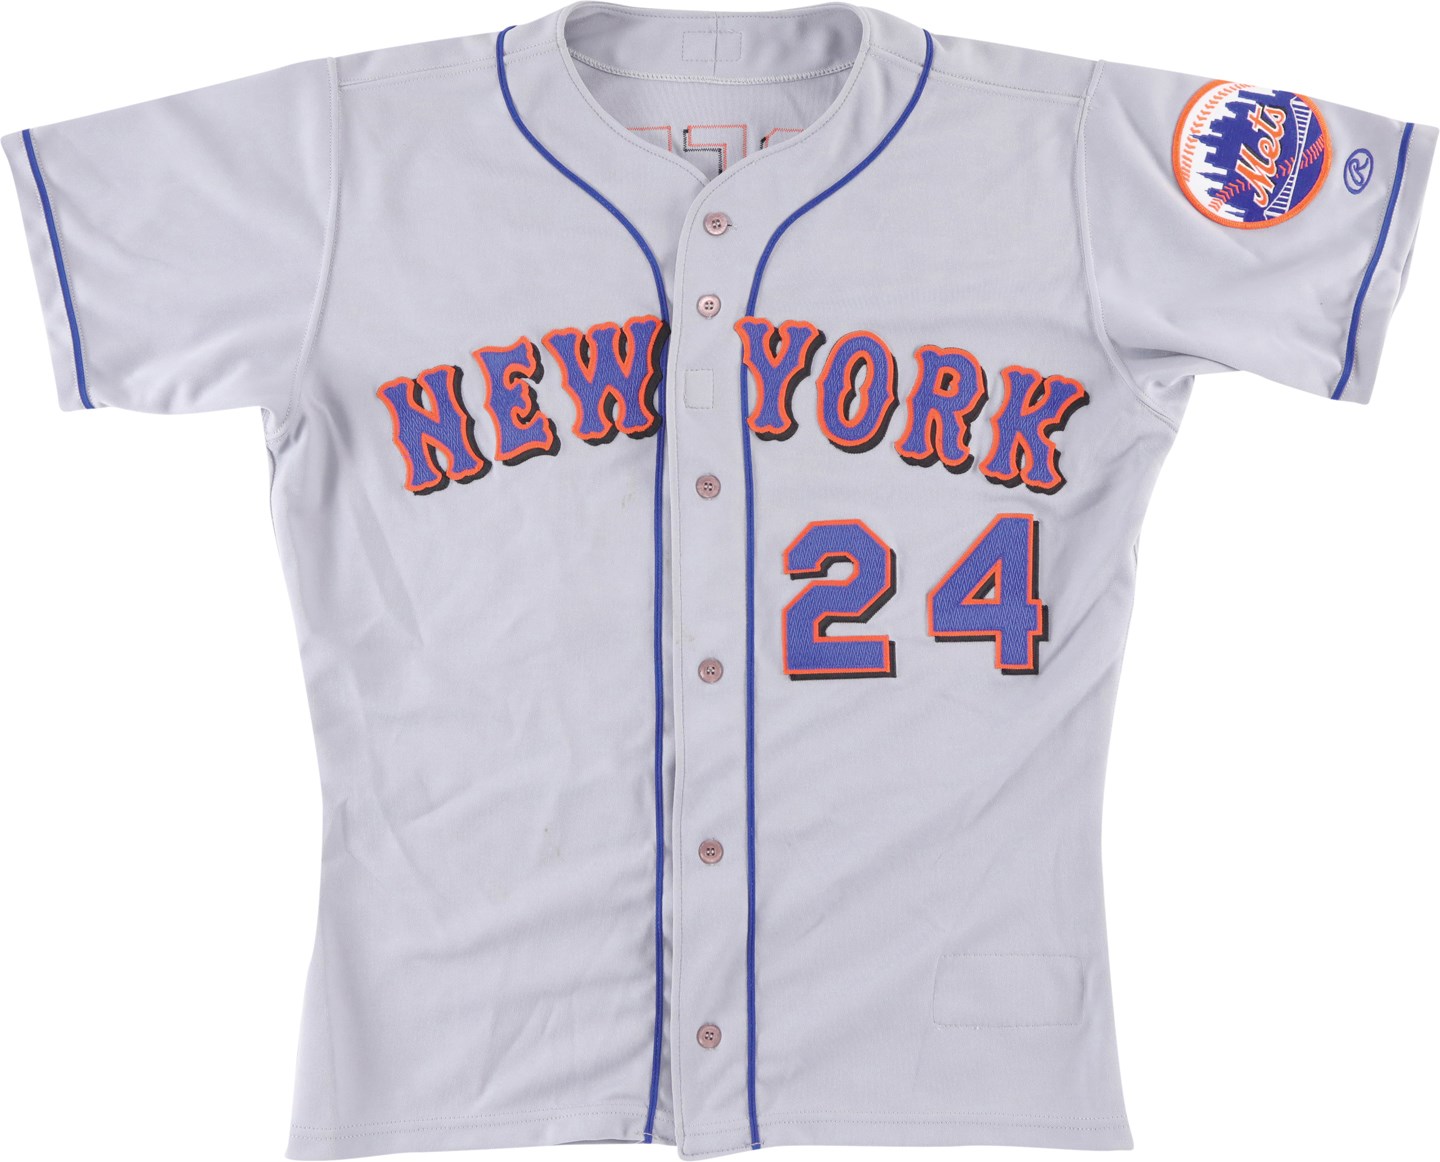 - 5/10/00 Rickey Henderson New York Mets Game Worn Jersey - Last Multi-Hit Game as a Met (Davious Photo-Matched LOA)